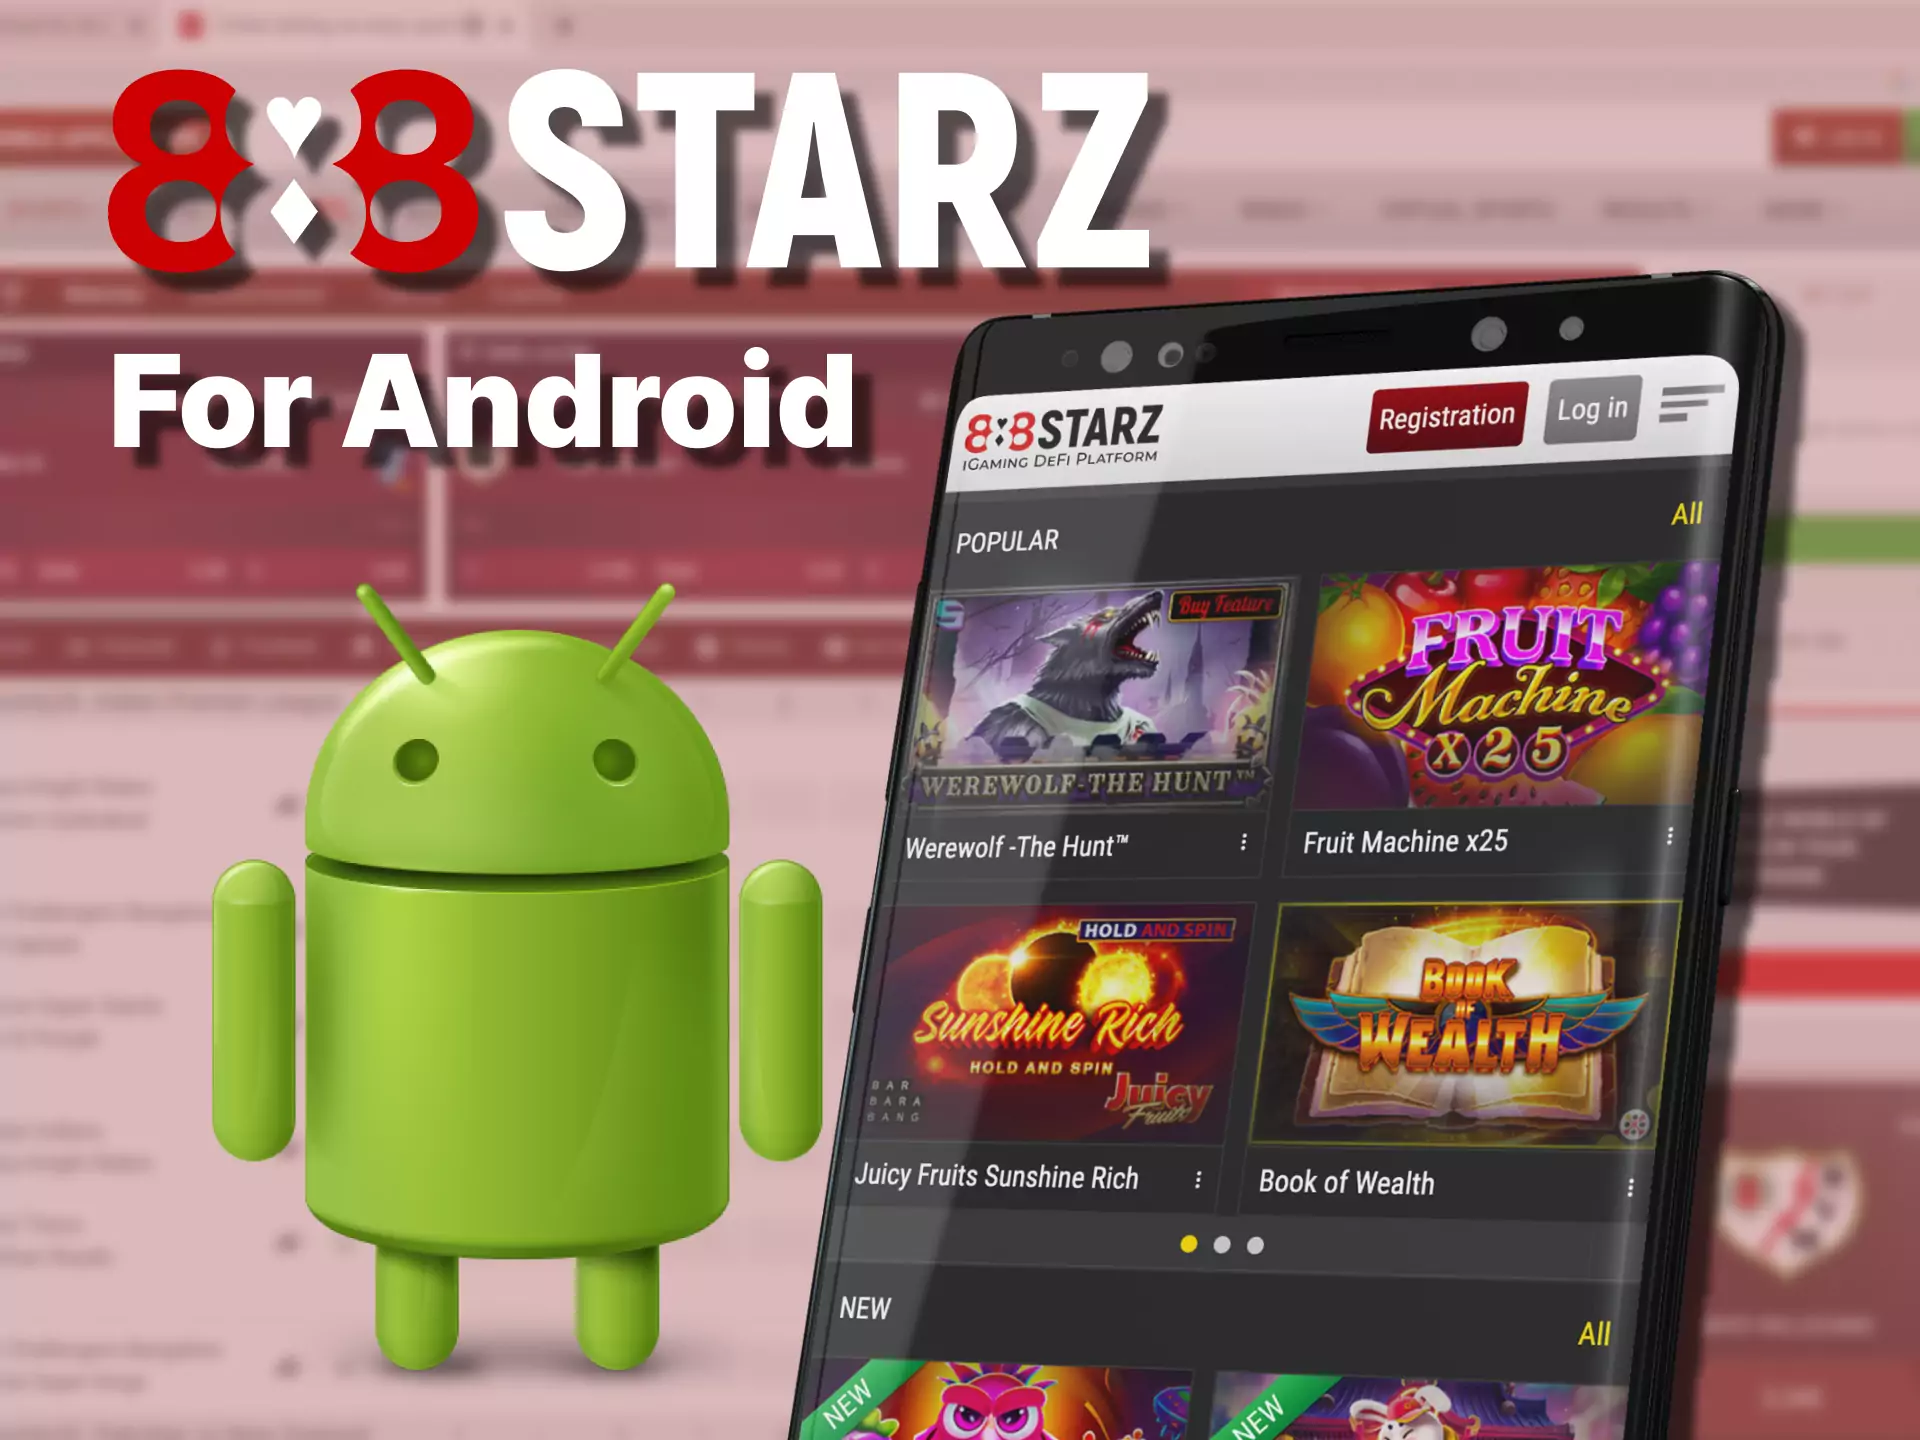 888starz app is available for users with Android devices.